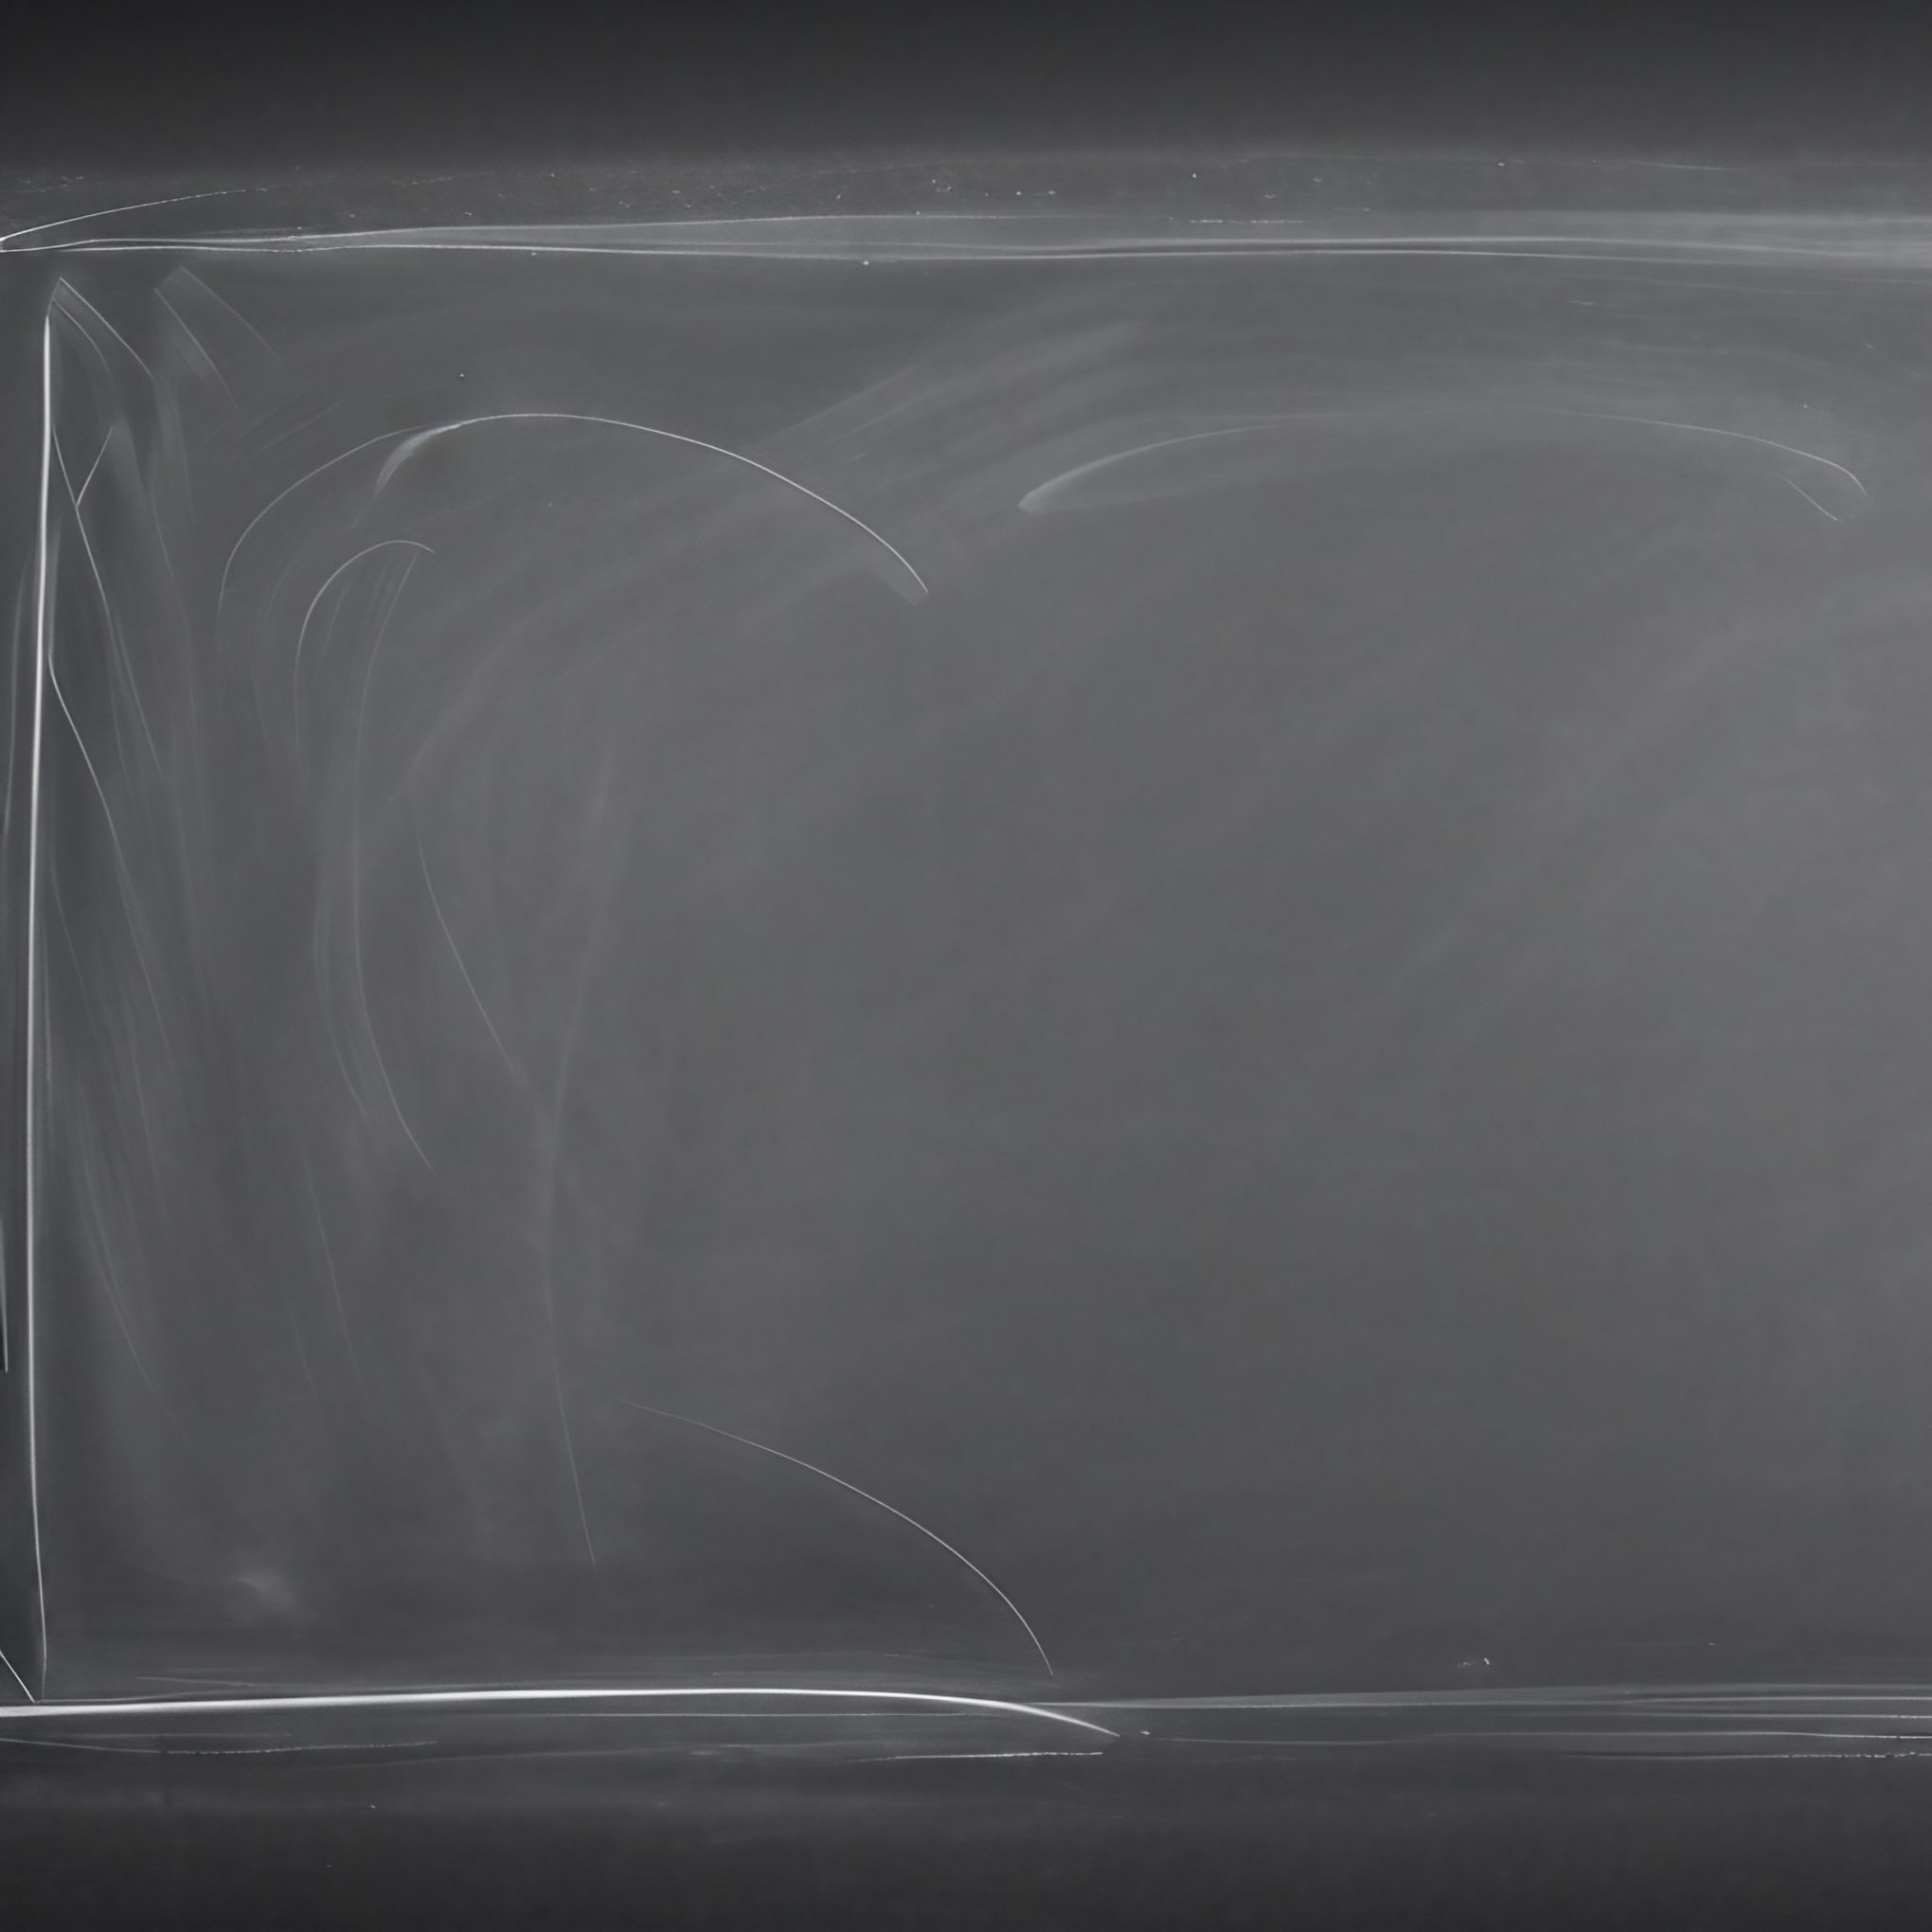 Used Classroom Chalkboard Free Stock Image Download